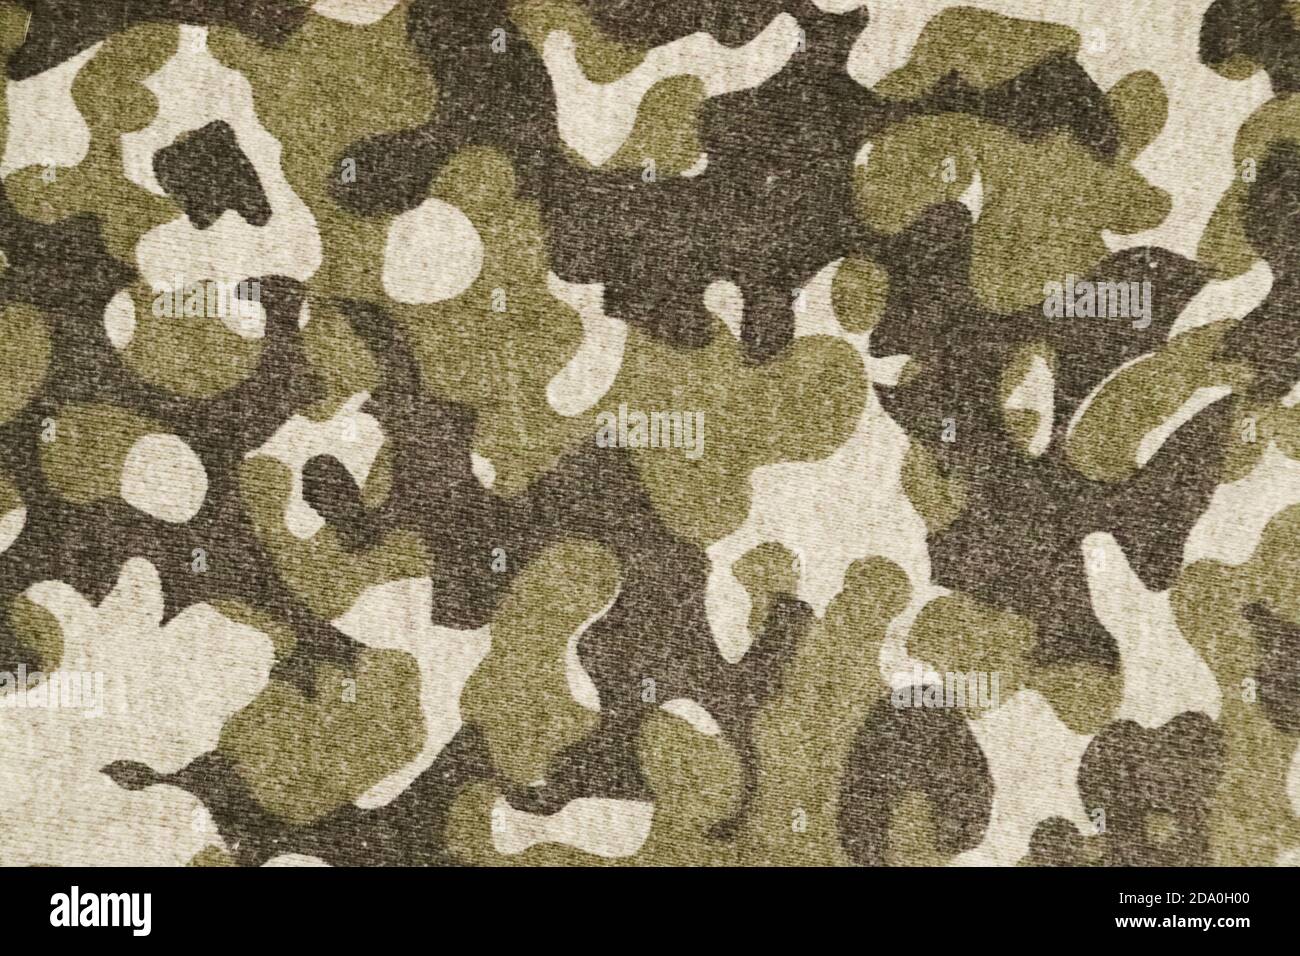 Vintage military background. Fabric with green retro camouflage pattern. Stock Photo